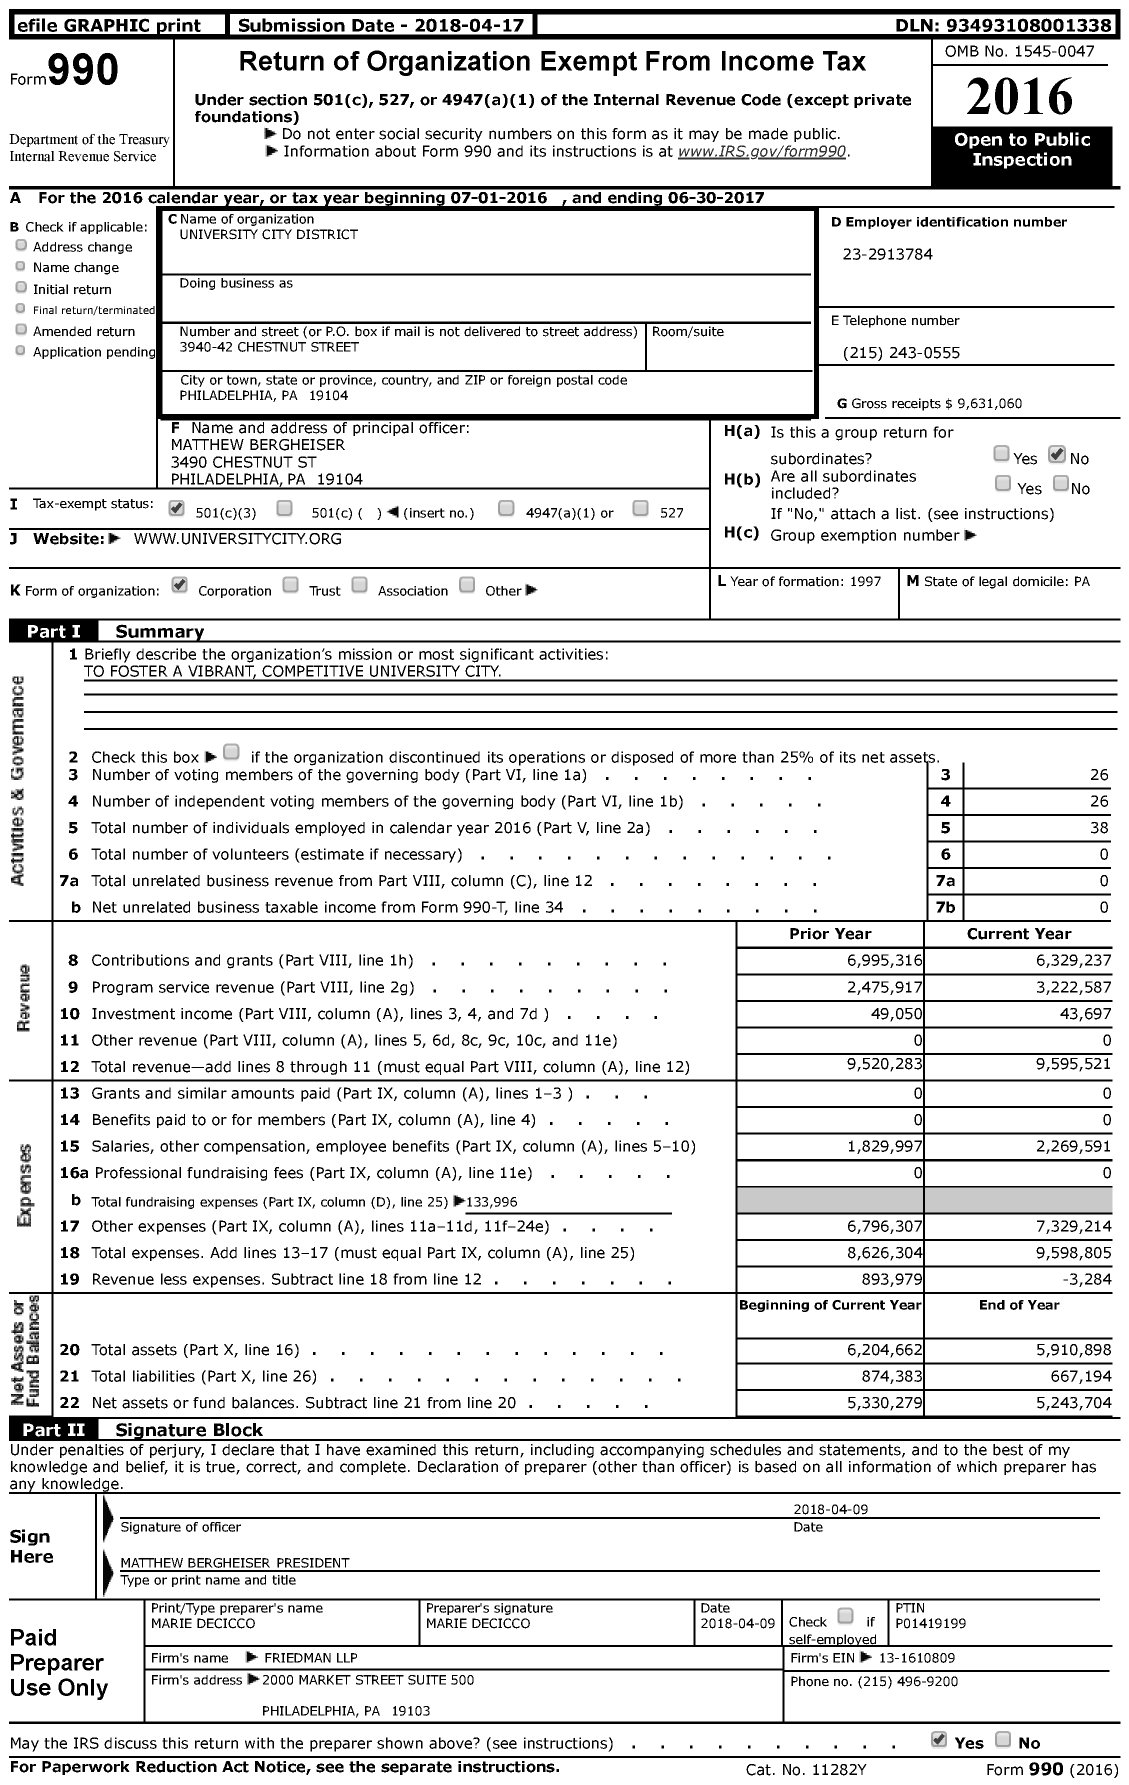 Image of first page of 2016 Form 990 for University City District (UCD)